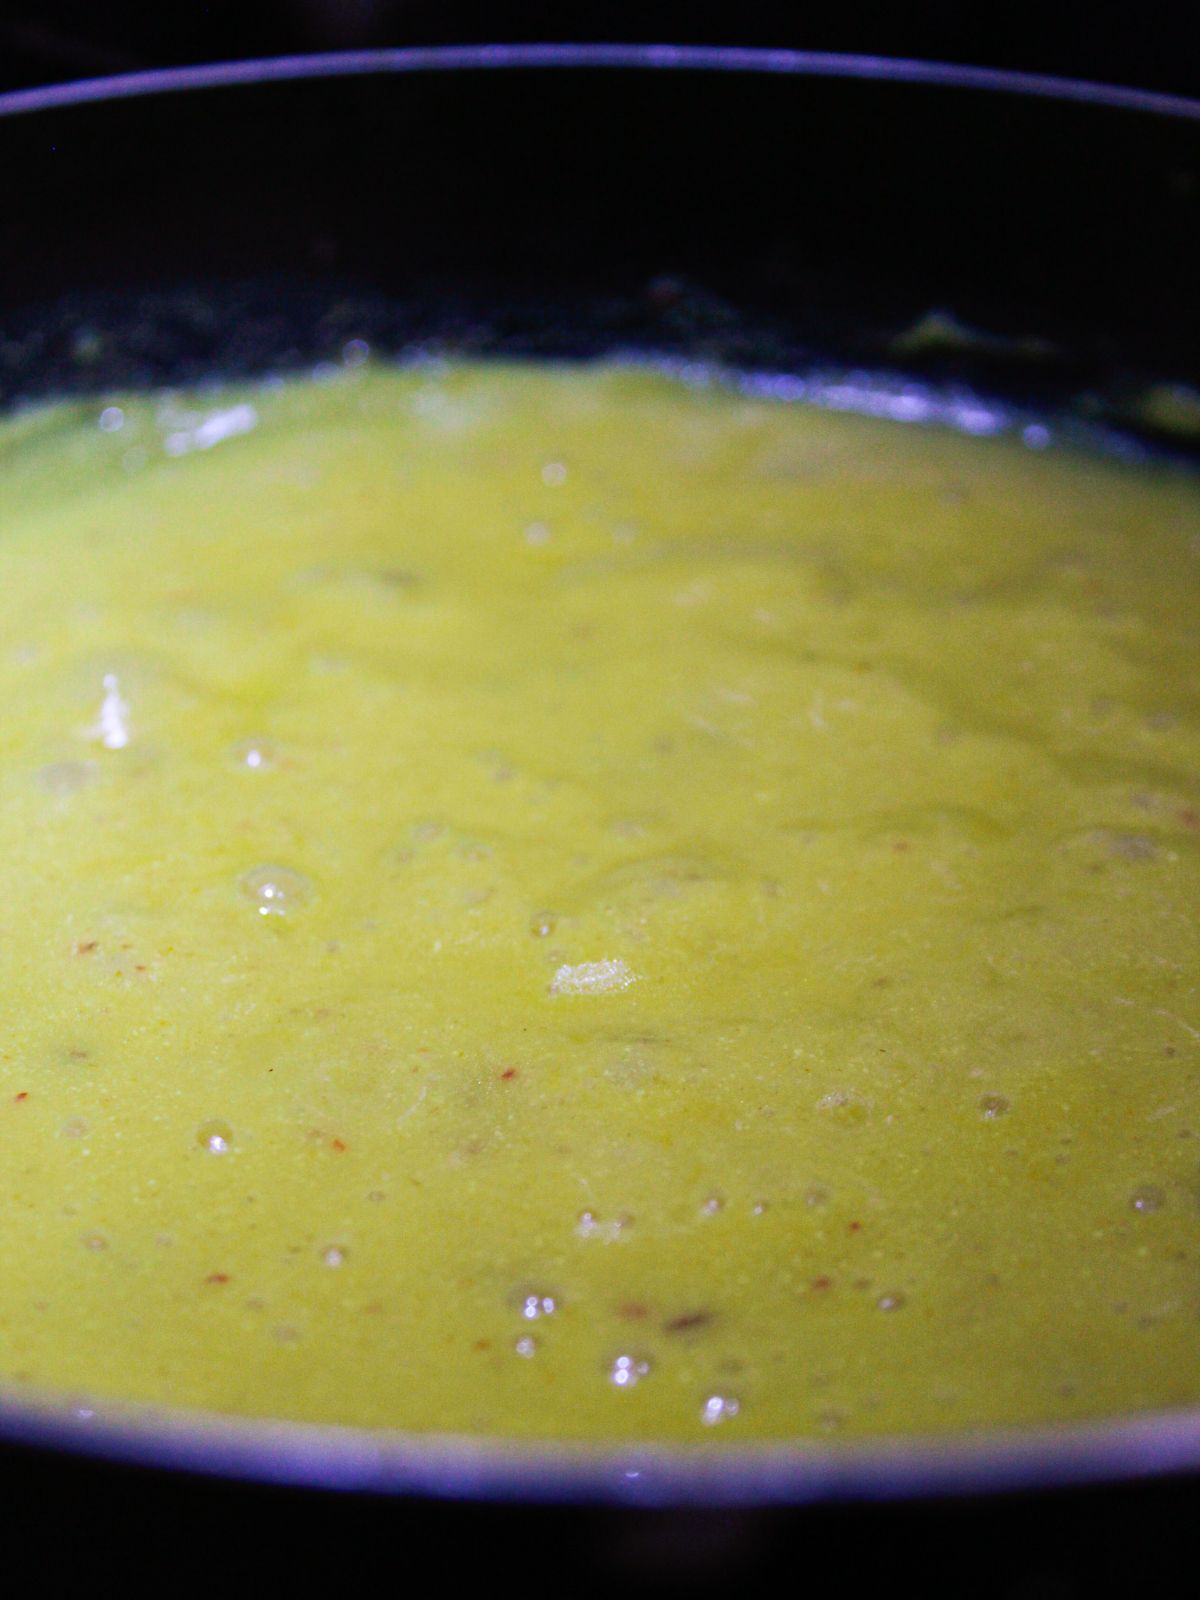 Mix the kadhi until the colour change and it gets dense